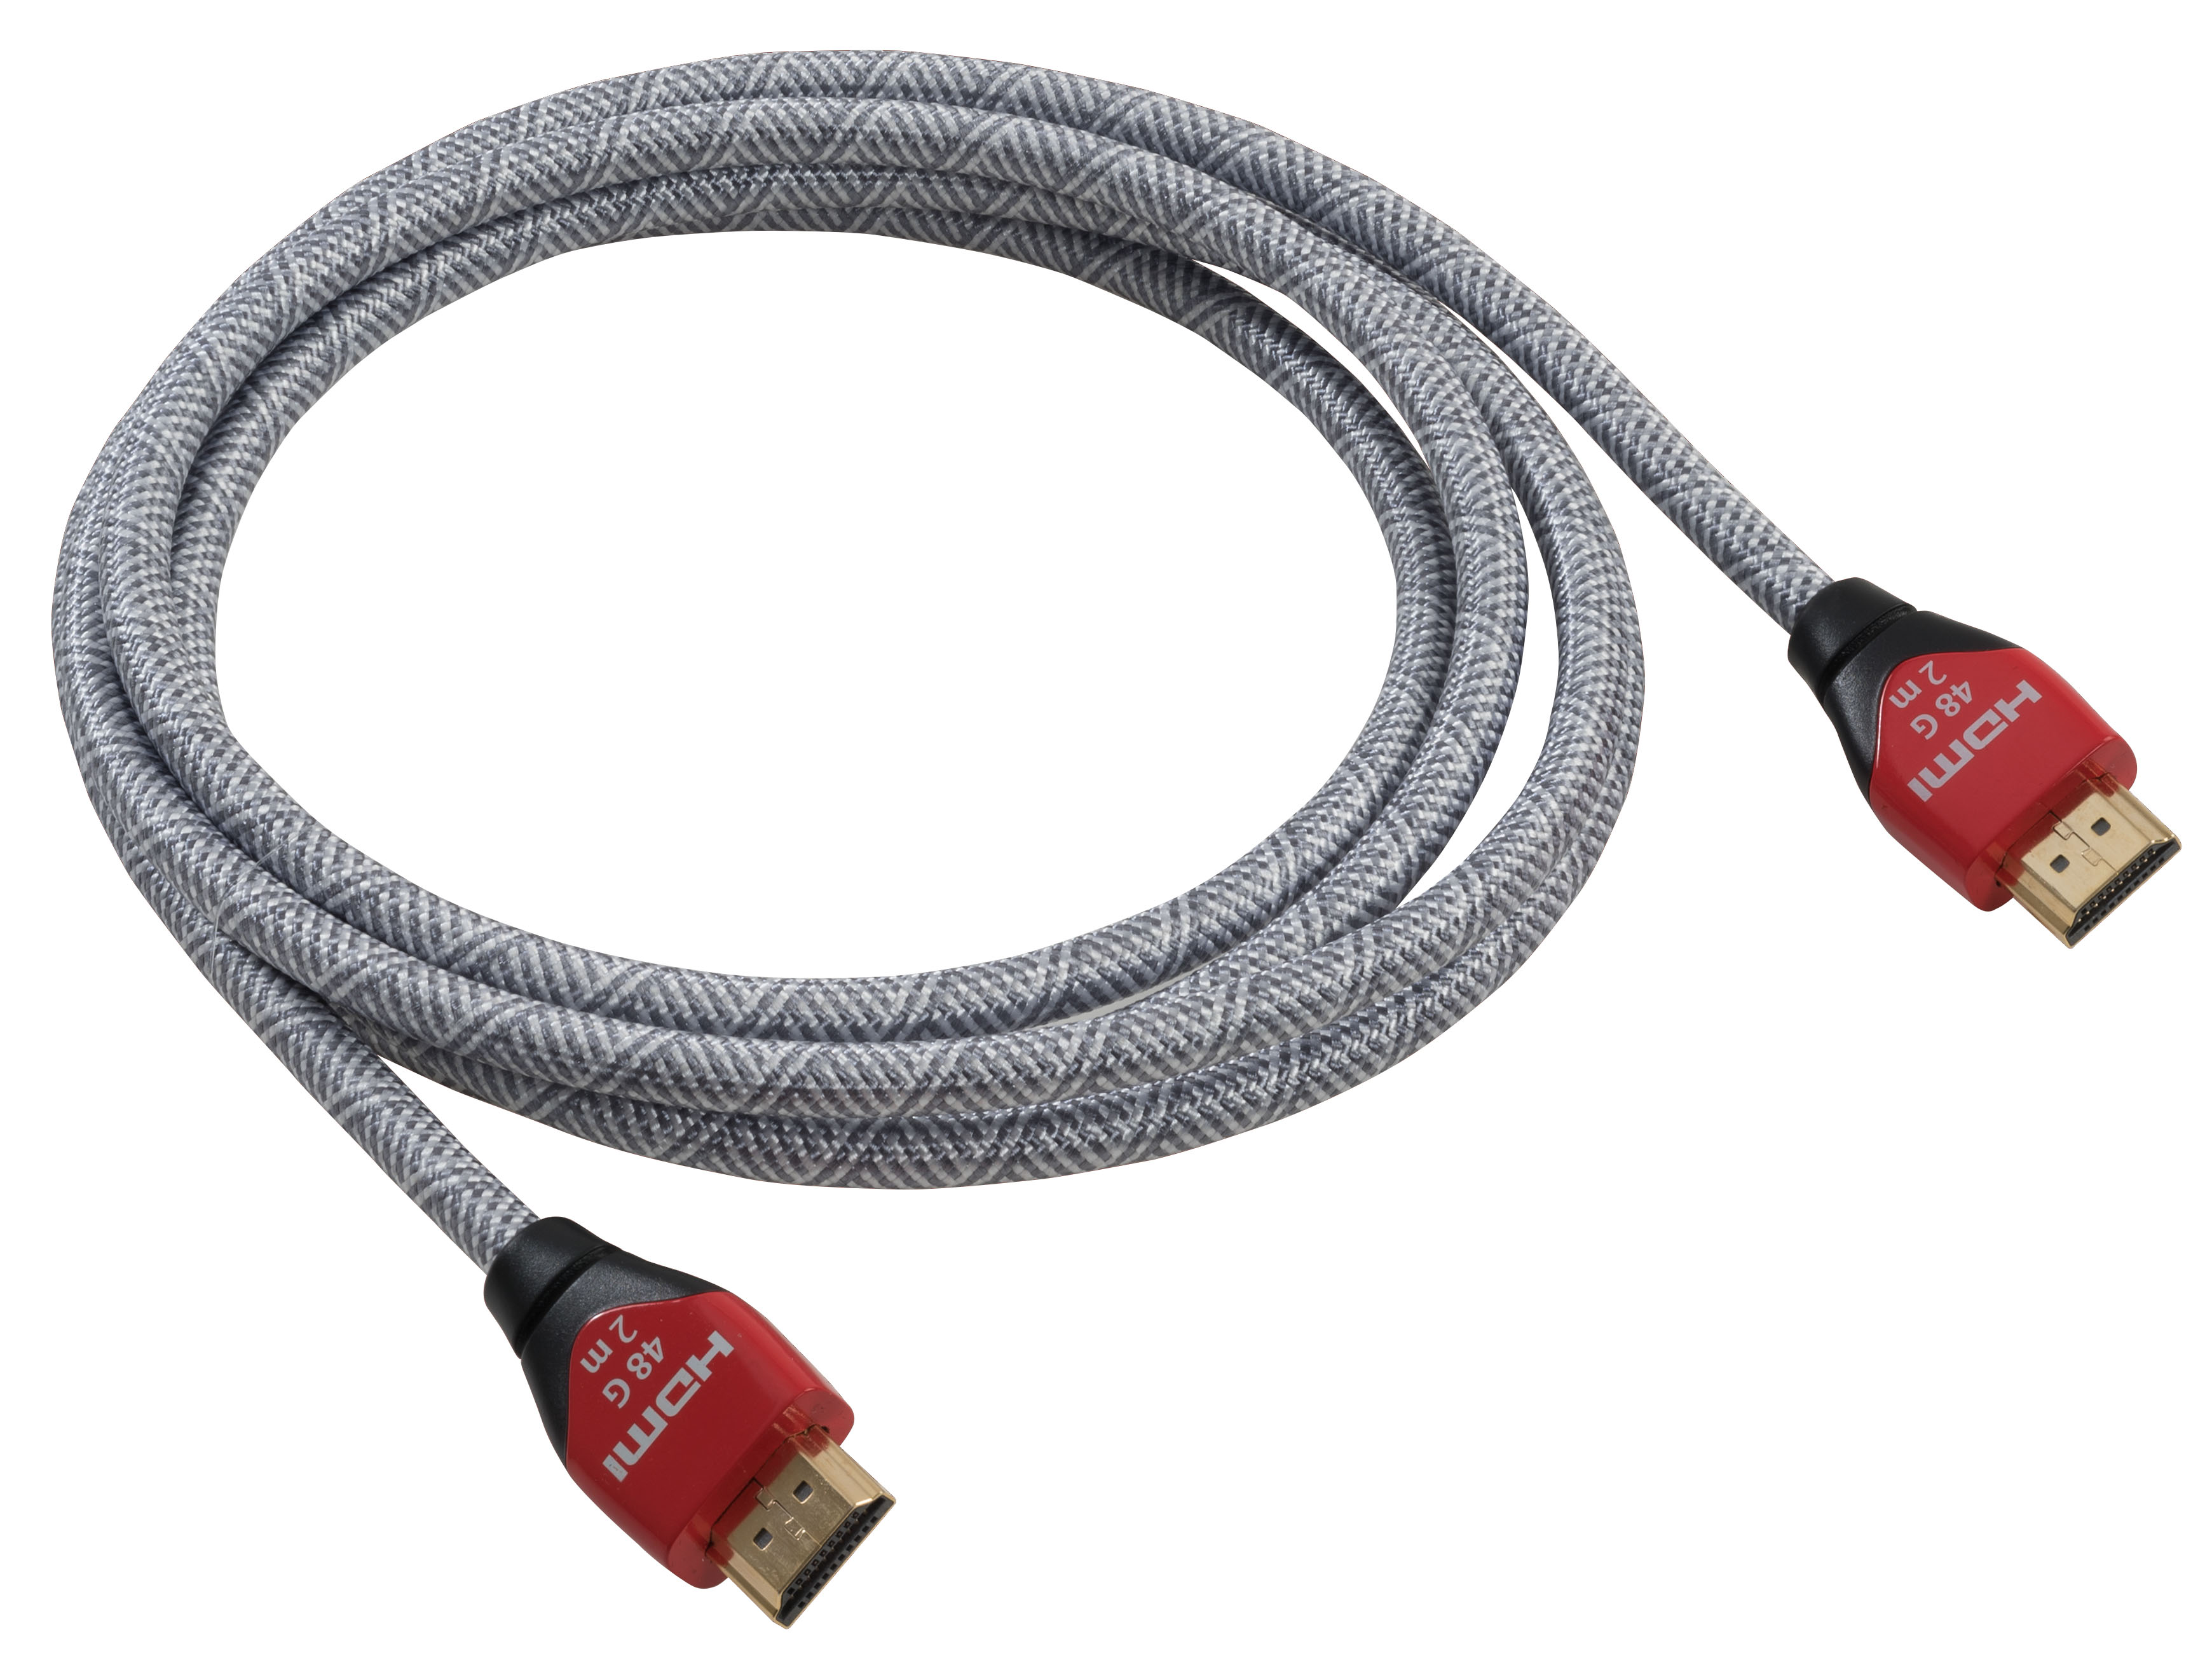 High Speed HDMI ™ cable with Ethernet 7.5 meters - HDMI Cables - Multimedia  Cables - Cables and Sockets